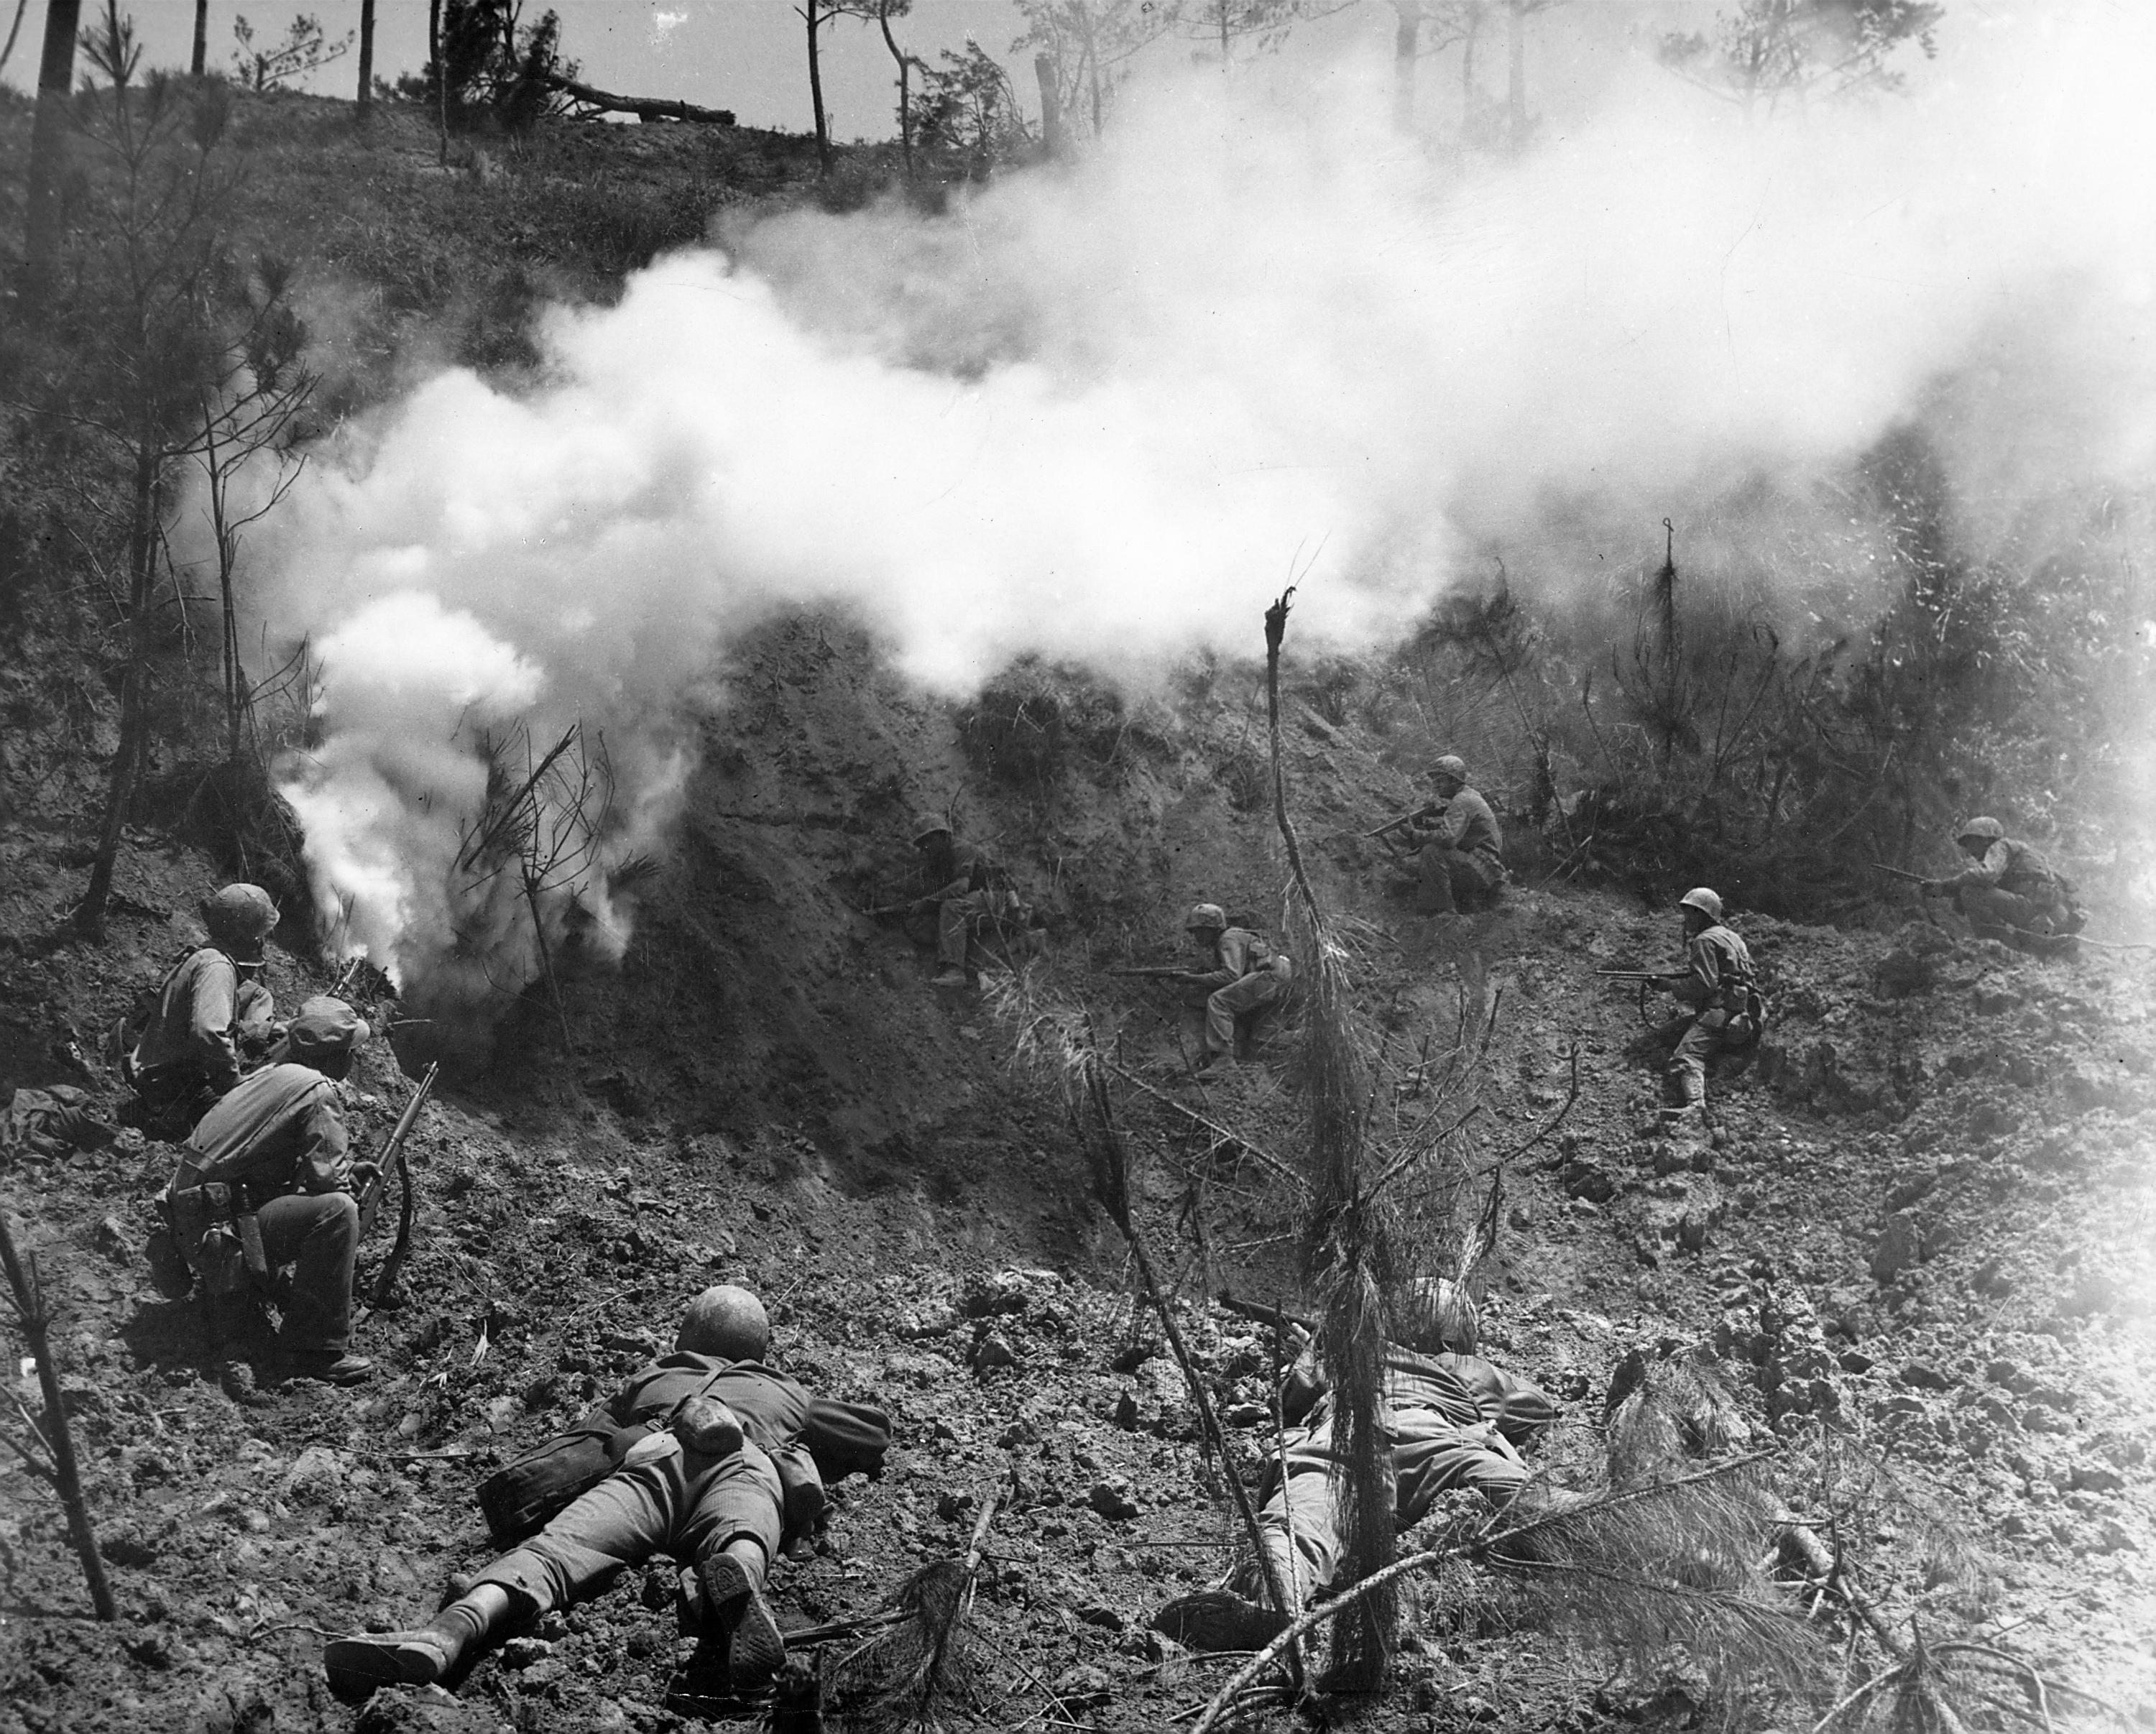 U.S. Marines wait to pick off enemies who flee cave after it was attacked with an explosive charge during the vicious fight for control of Okinawa, 1945.